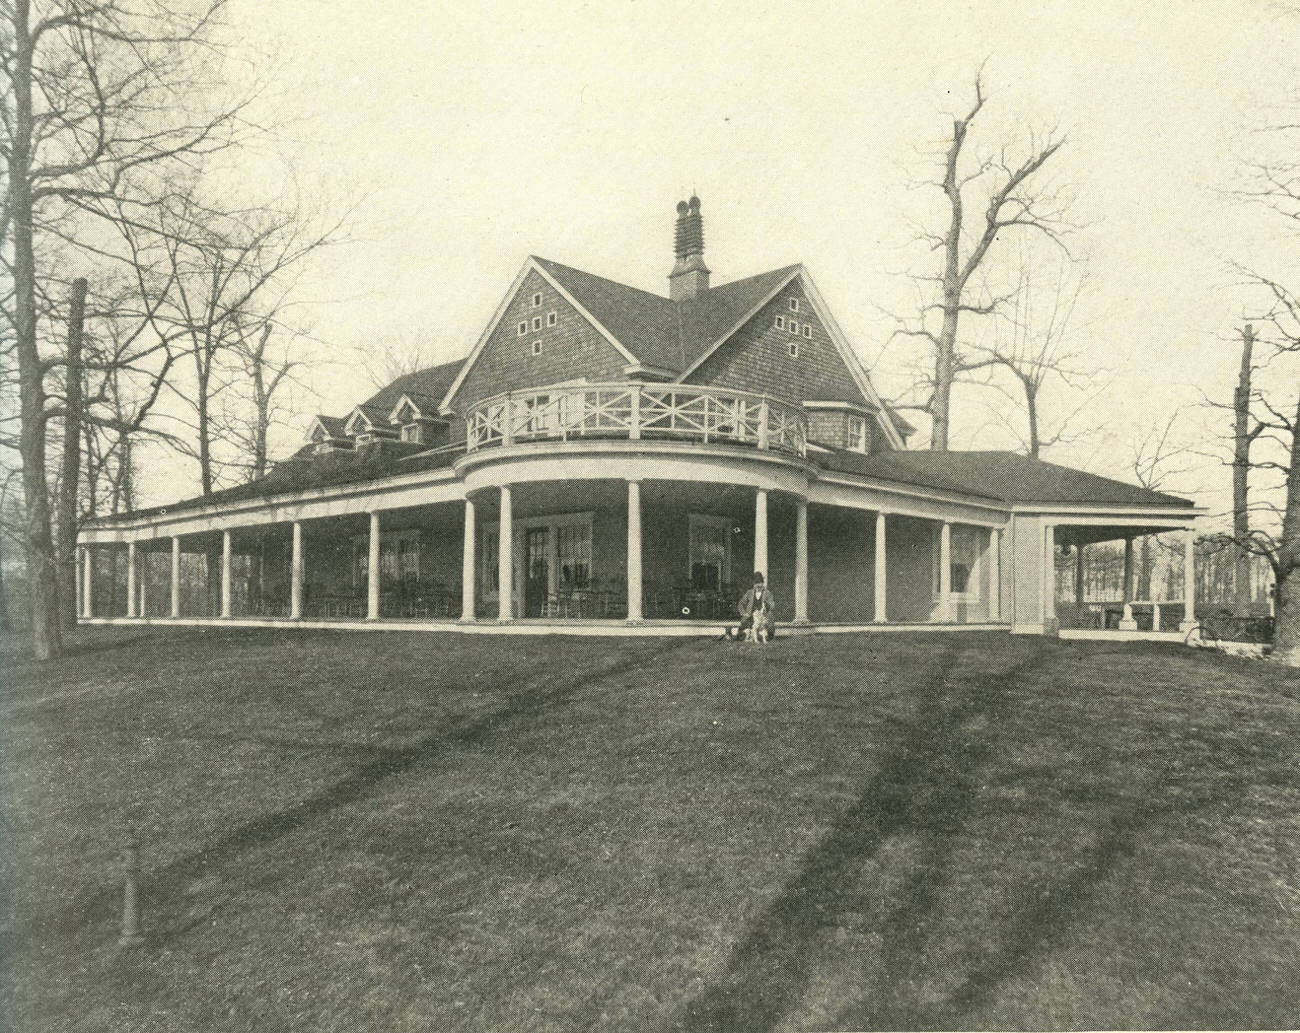 Arlington Country Club, also known as Arlington Golf and Riding Club, later Aladdin Country Club, 1901